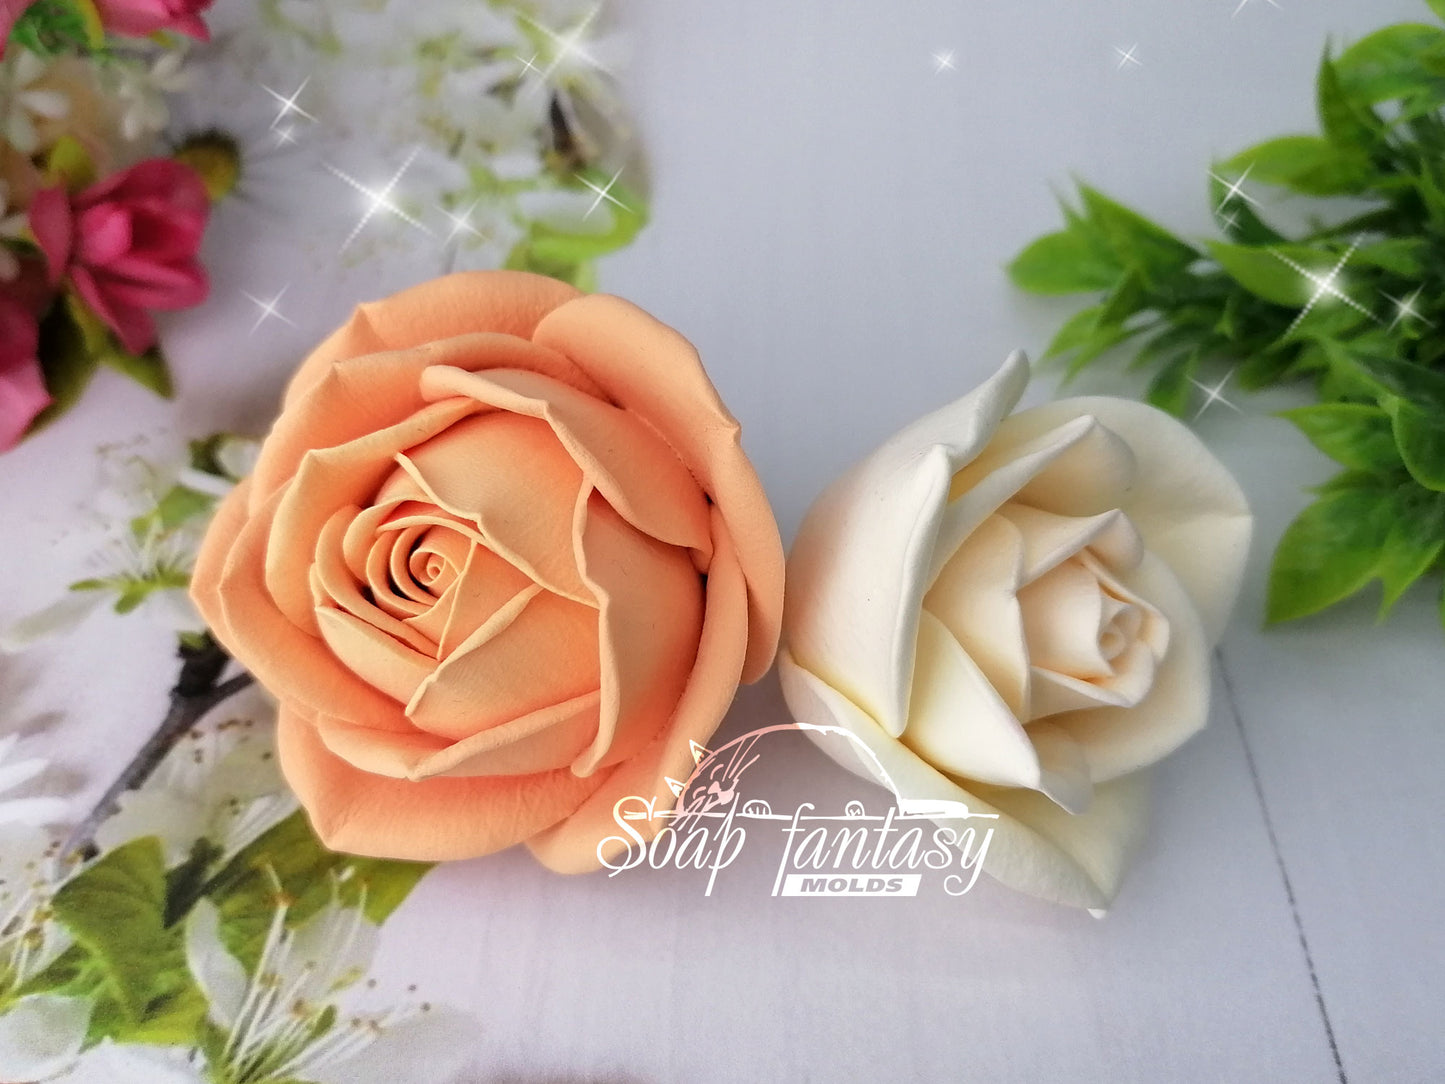 Rose "Annette" silicone mold for soap making